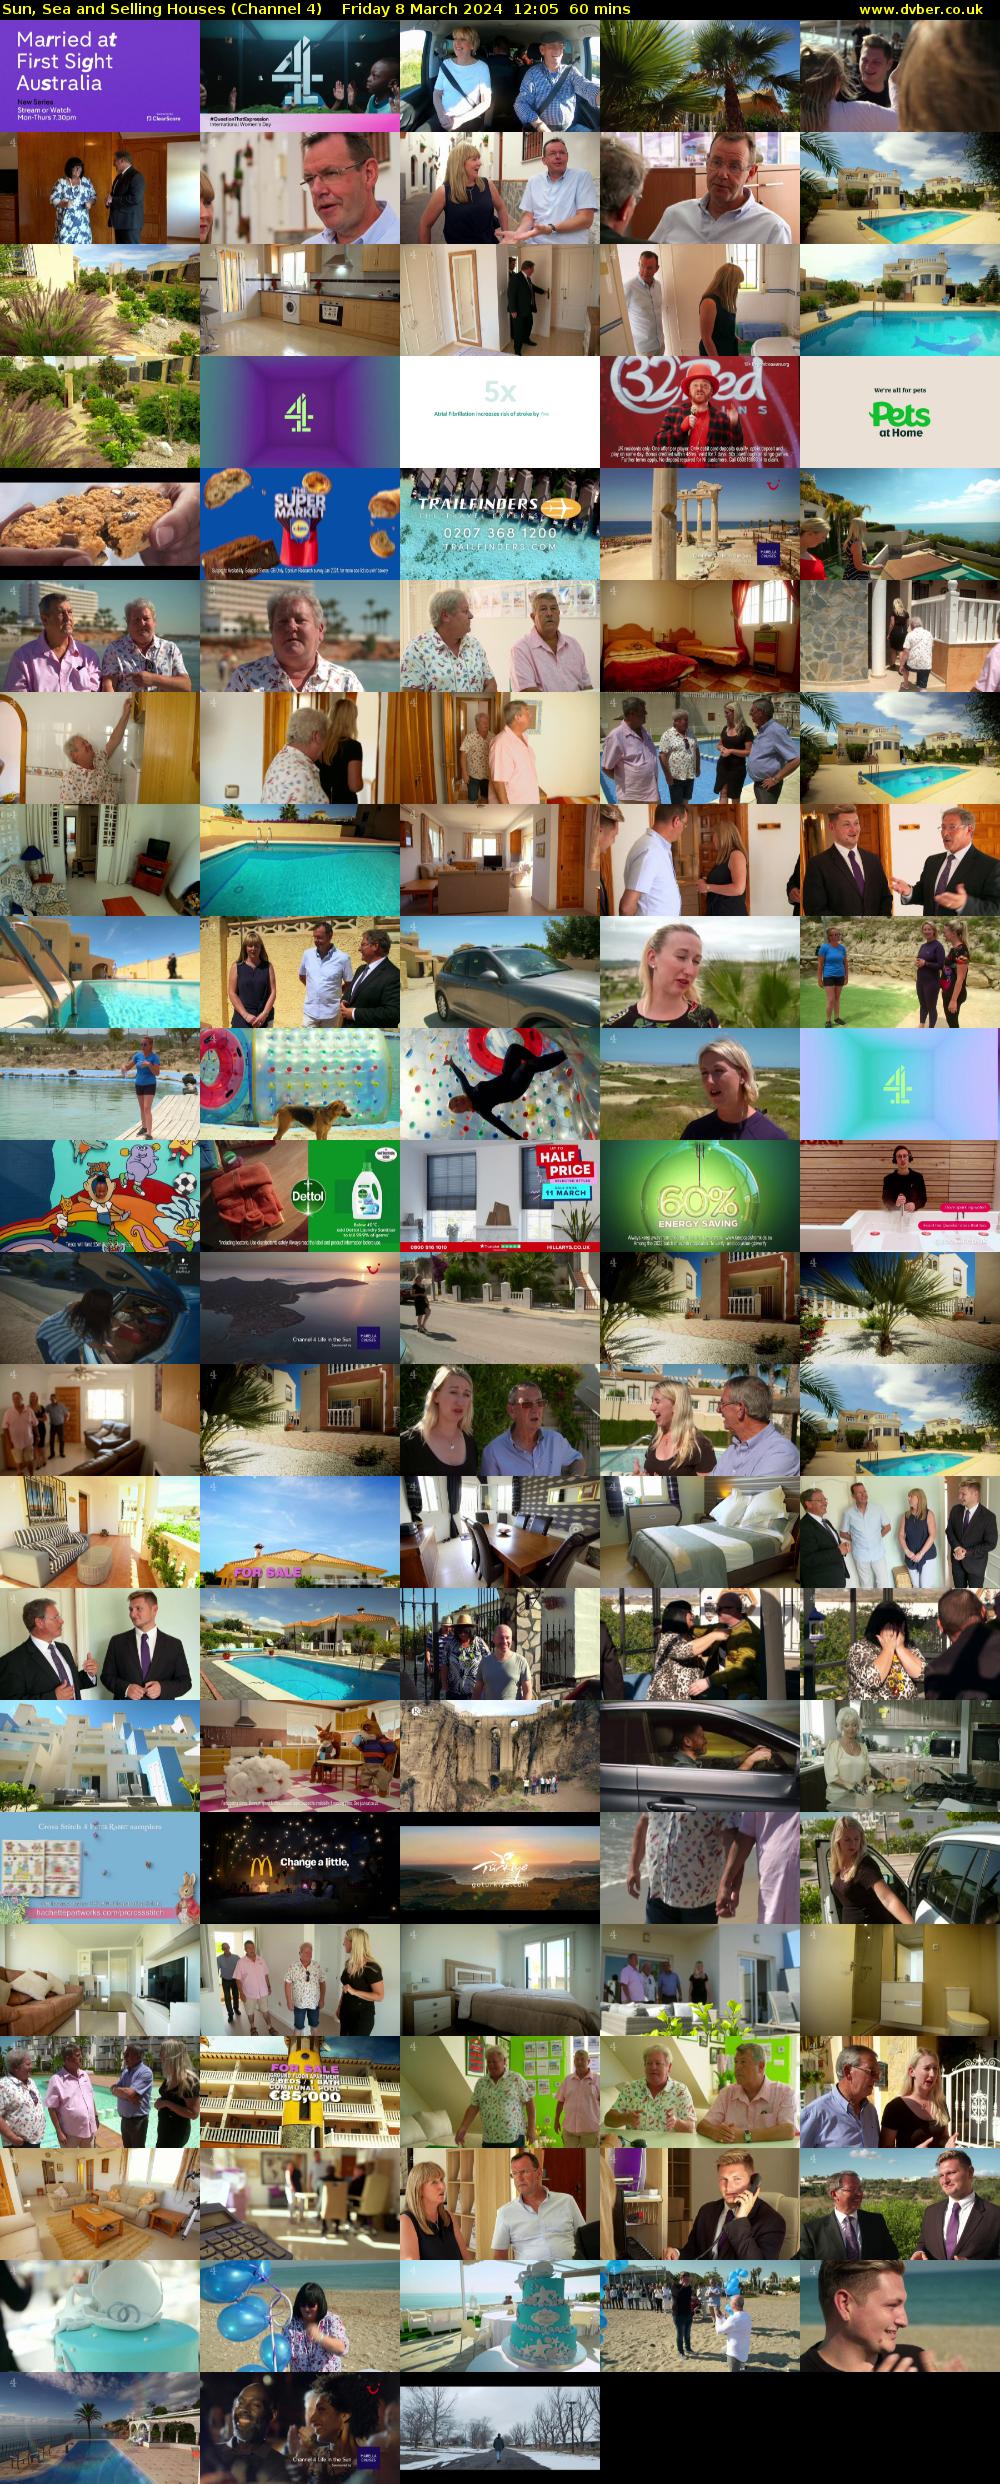 Sun, Sea and Selling Houses (Channel 4) Friday 8 March 2024 12:05 - 13:05